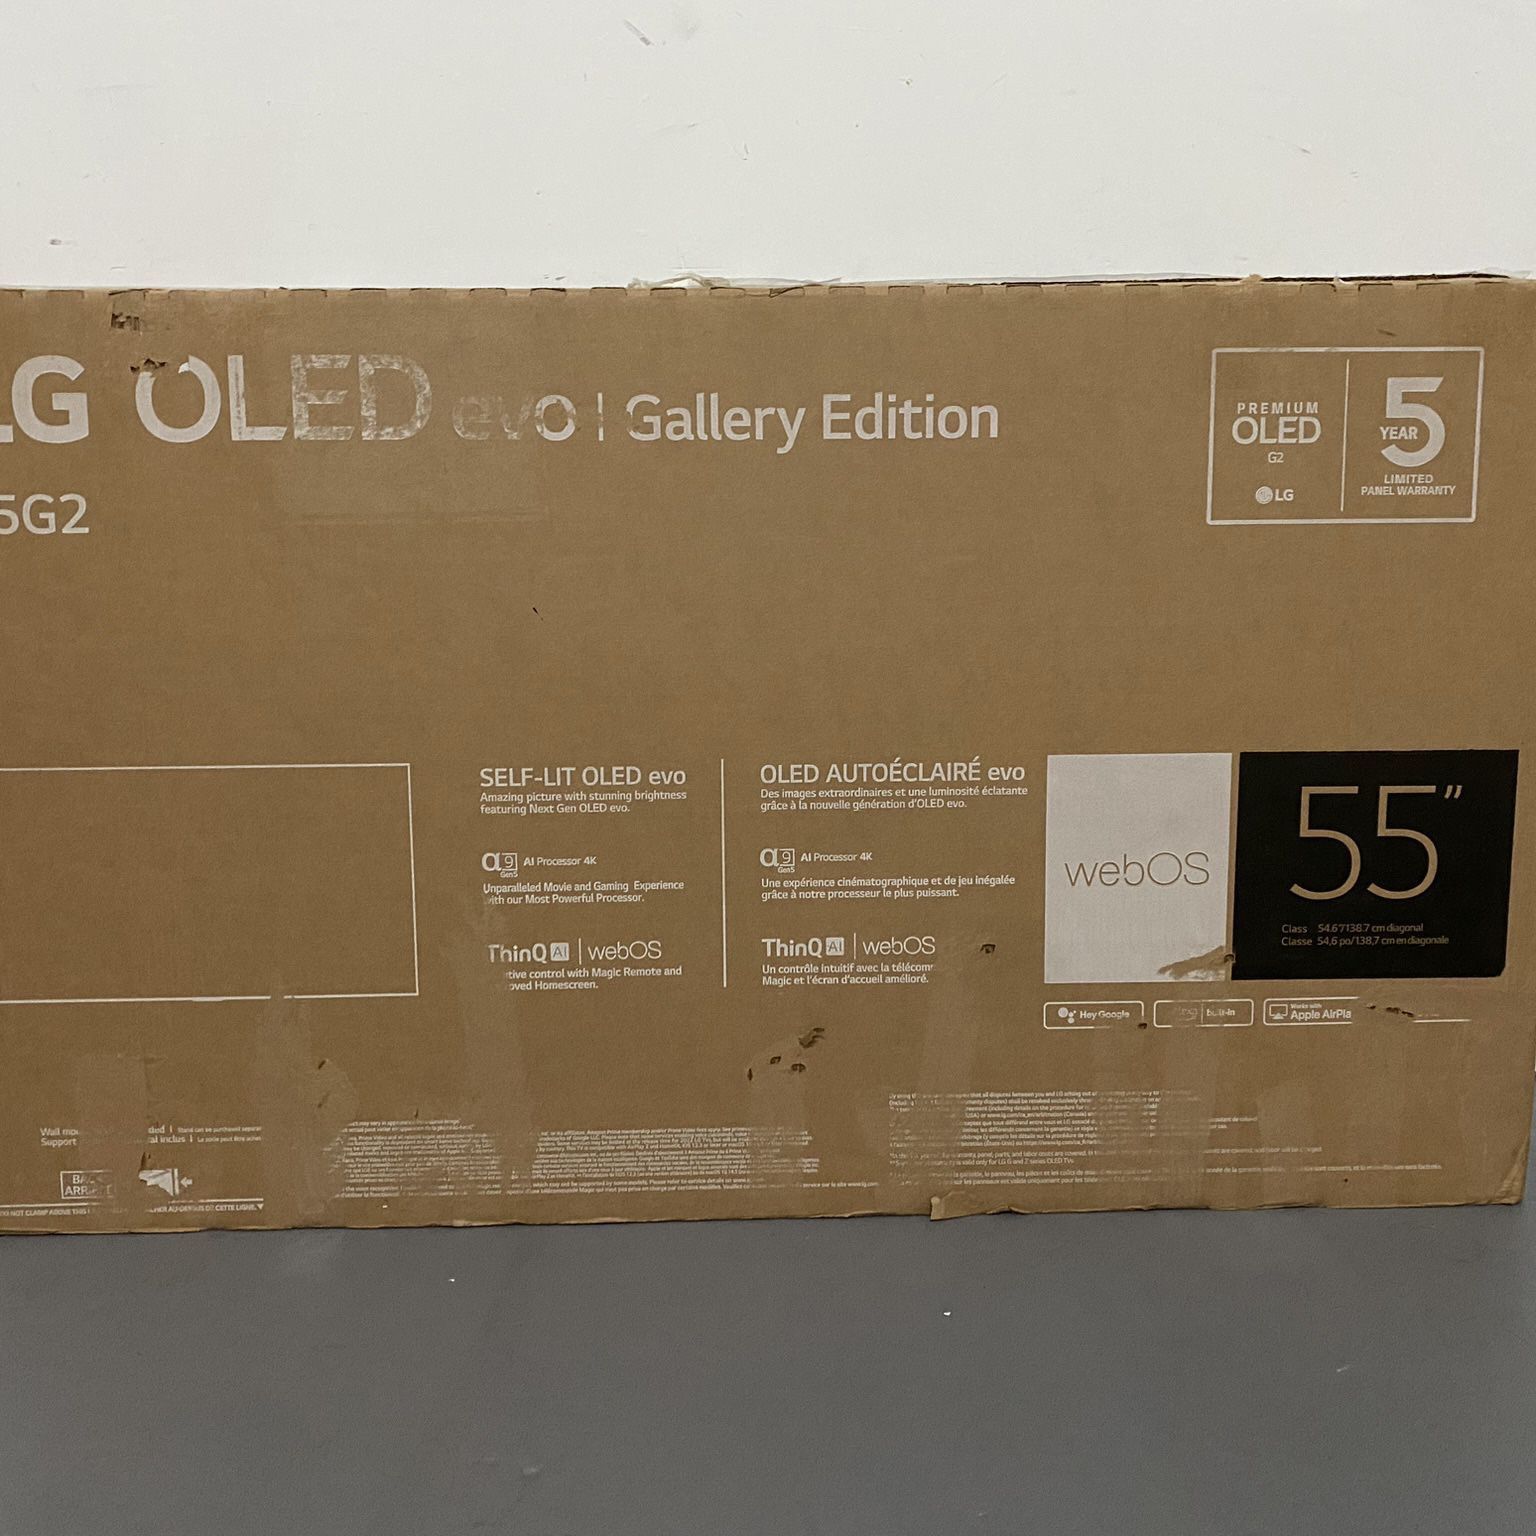 LG G2 55-inch OLED evo Gallery Edition TV About This Item